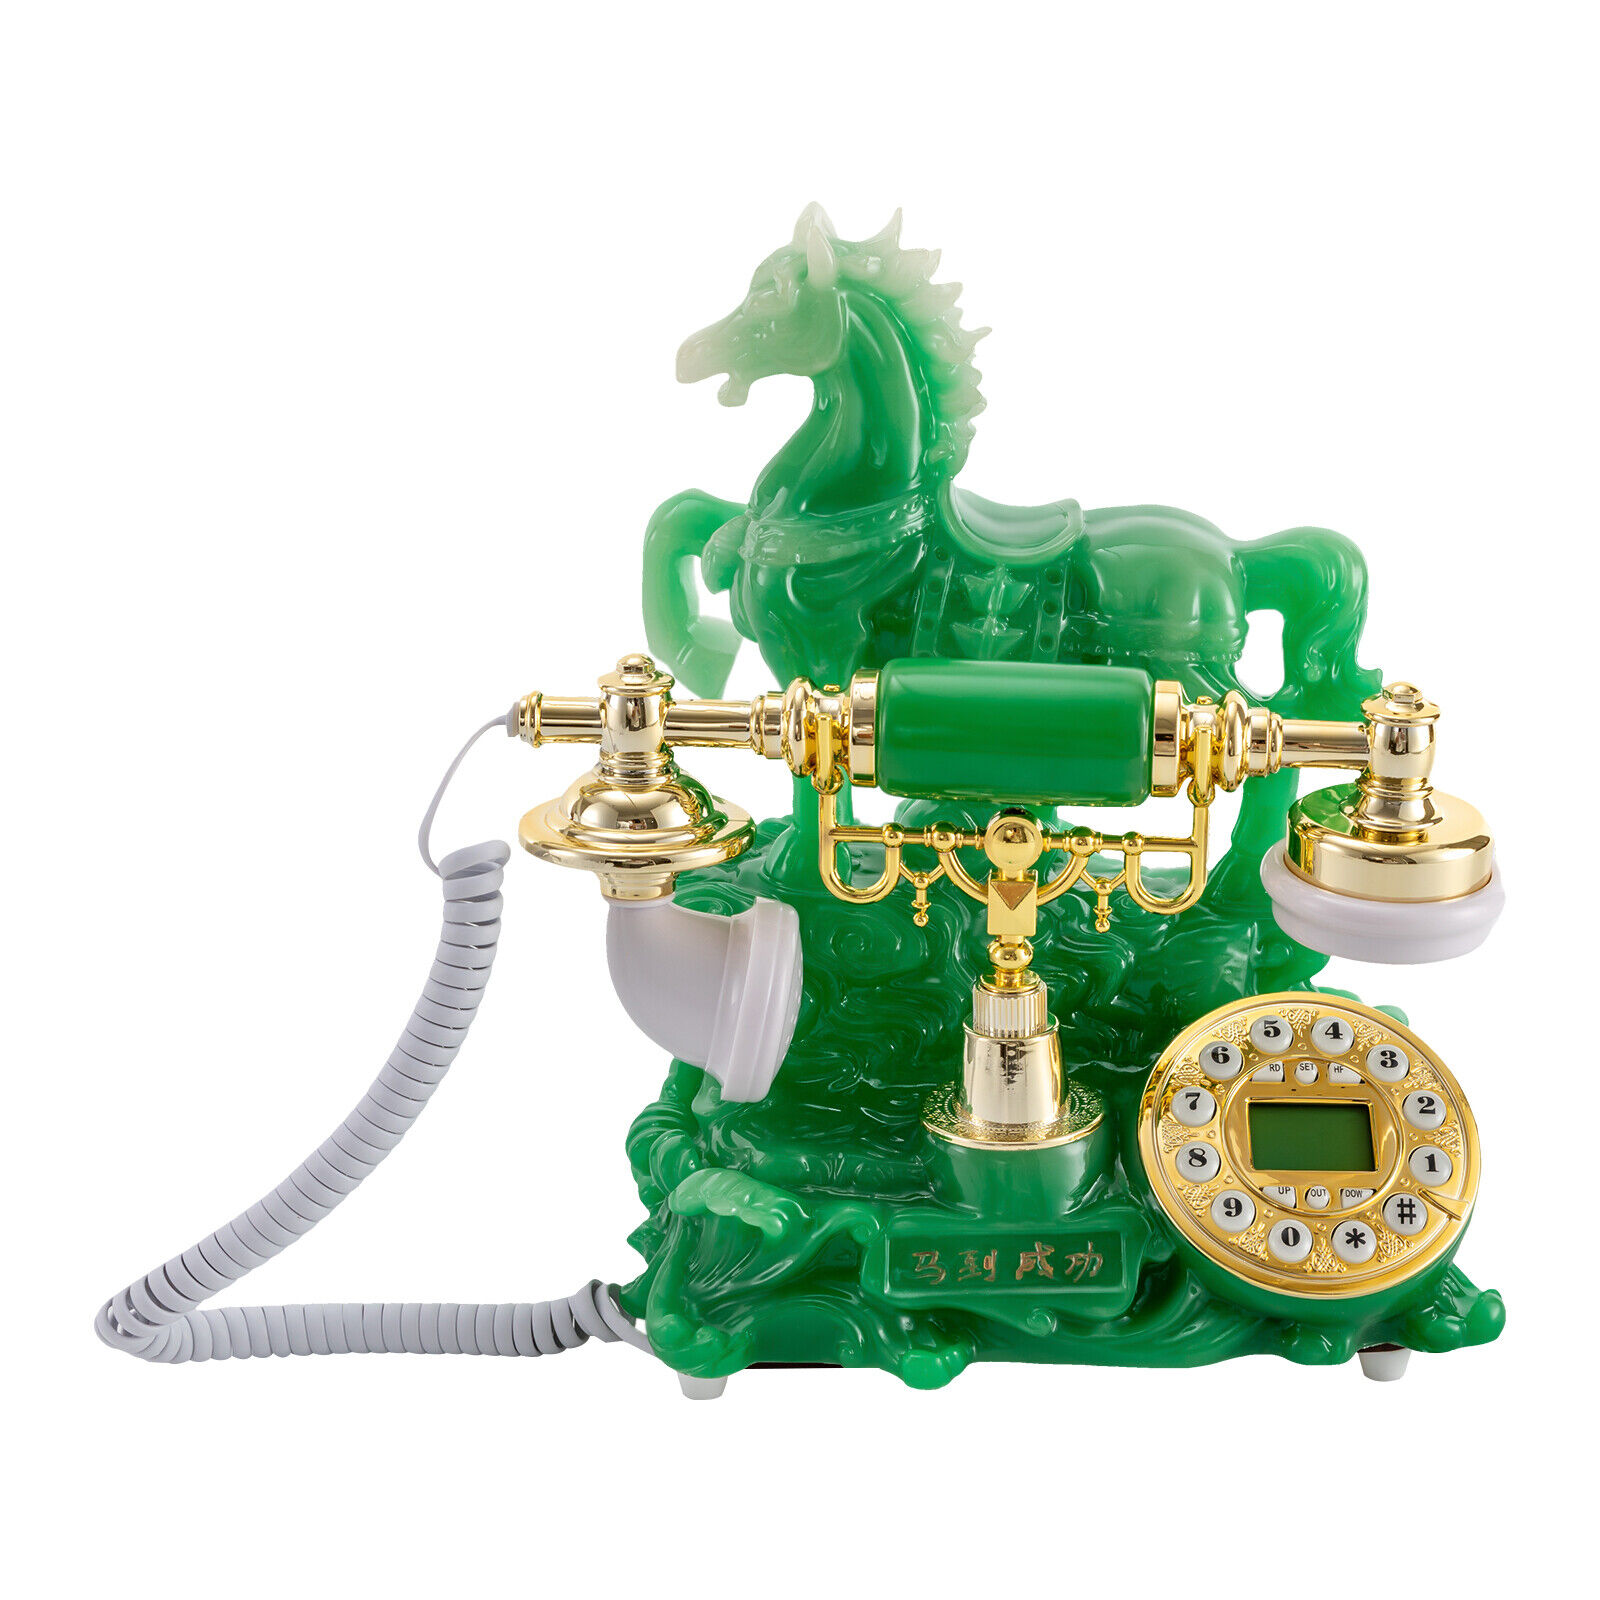 Retro Horse Design Telephone Dial Corded Phone Exquisite Workmanship Green Unbranded Does not apply - фотография #13